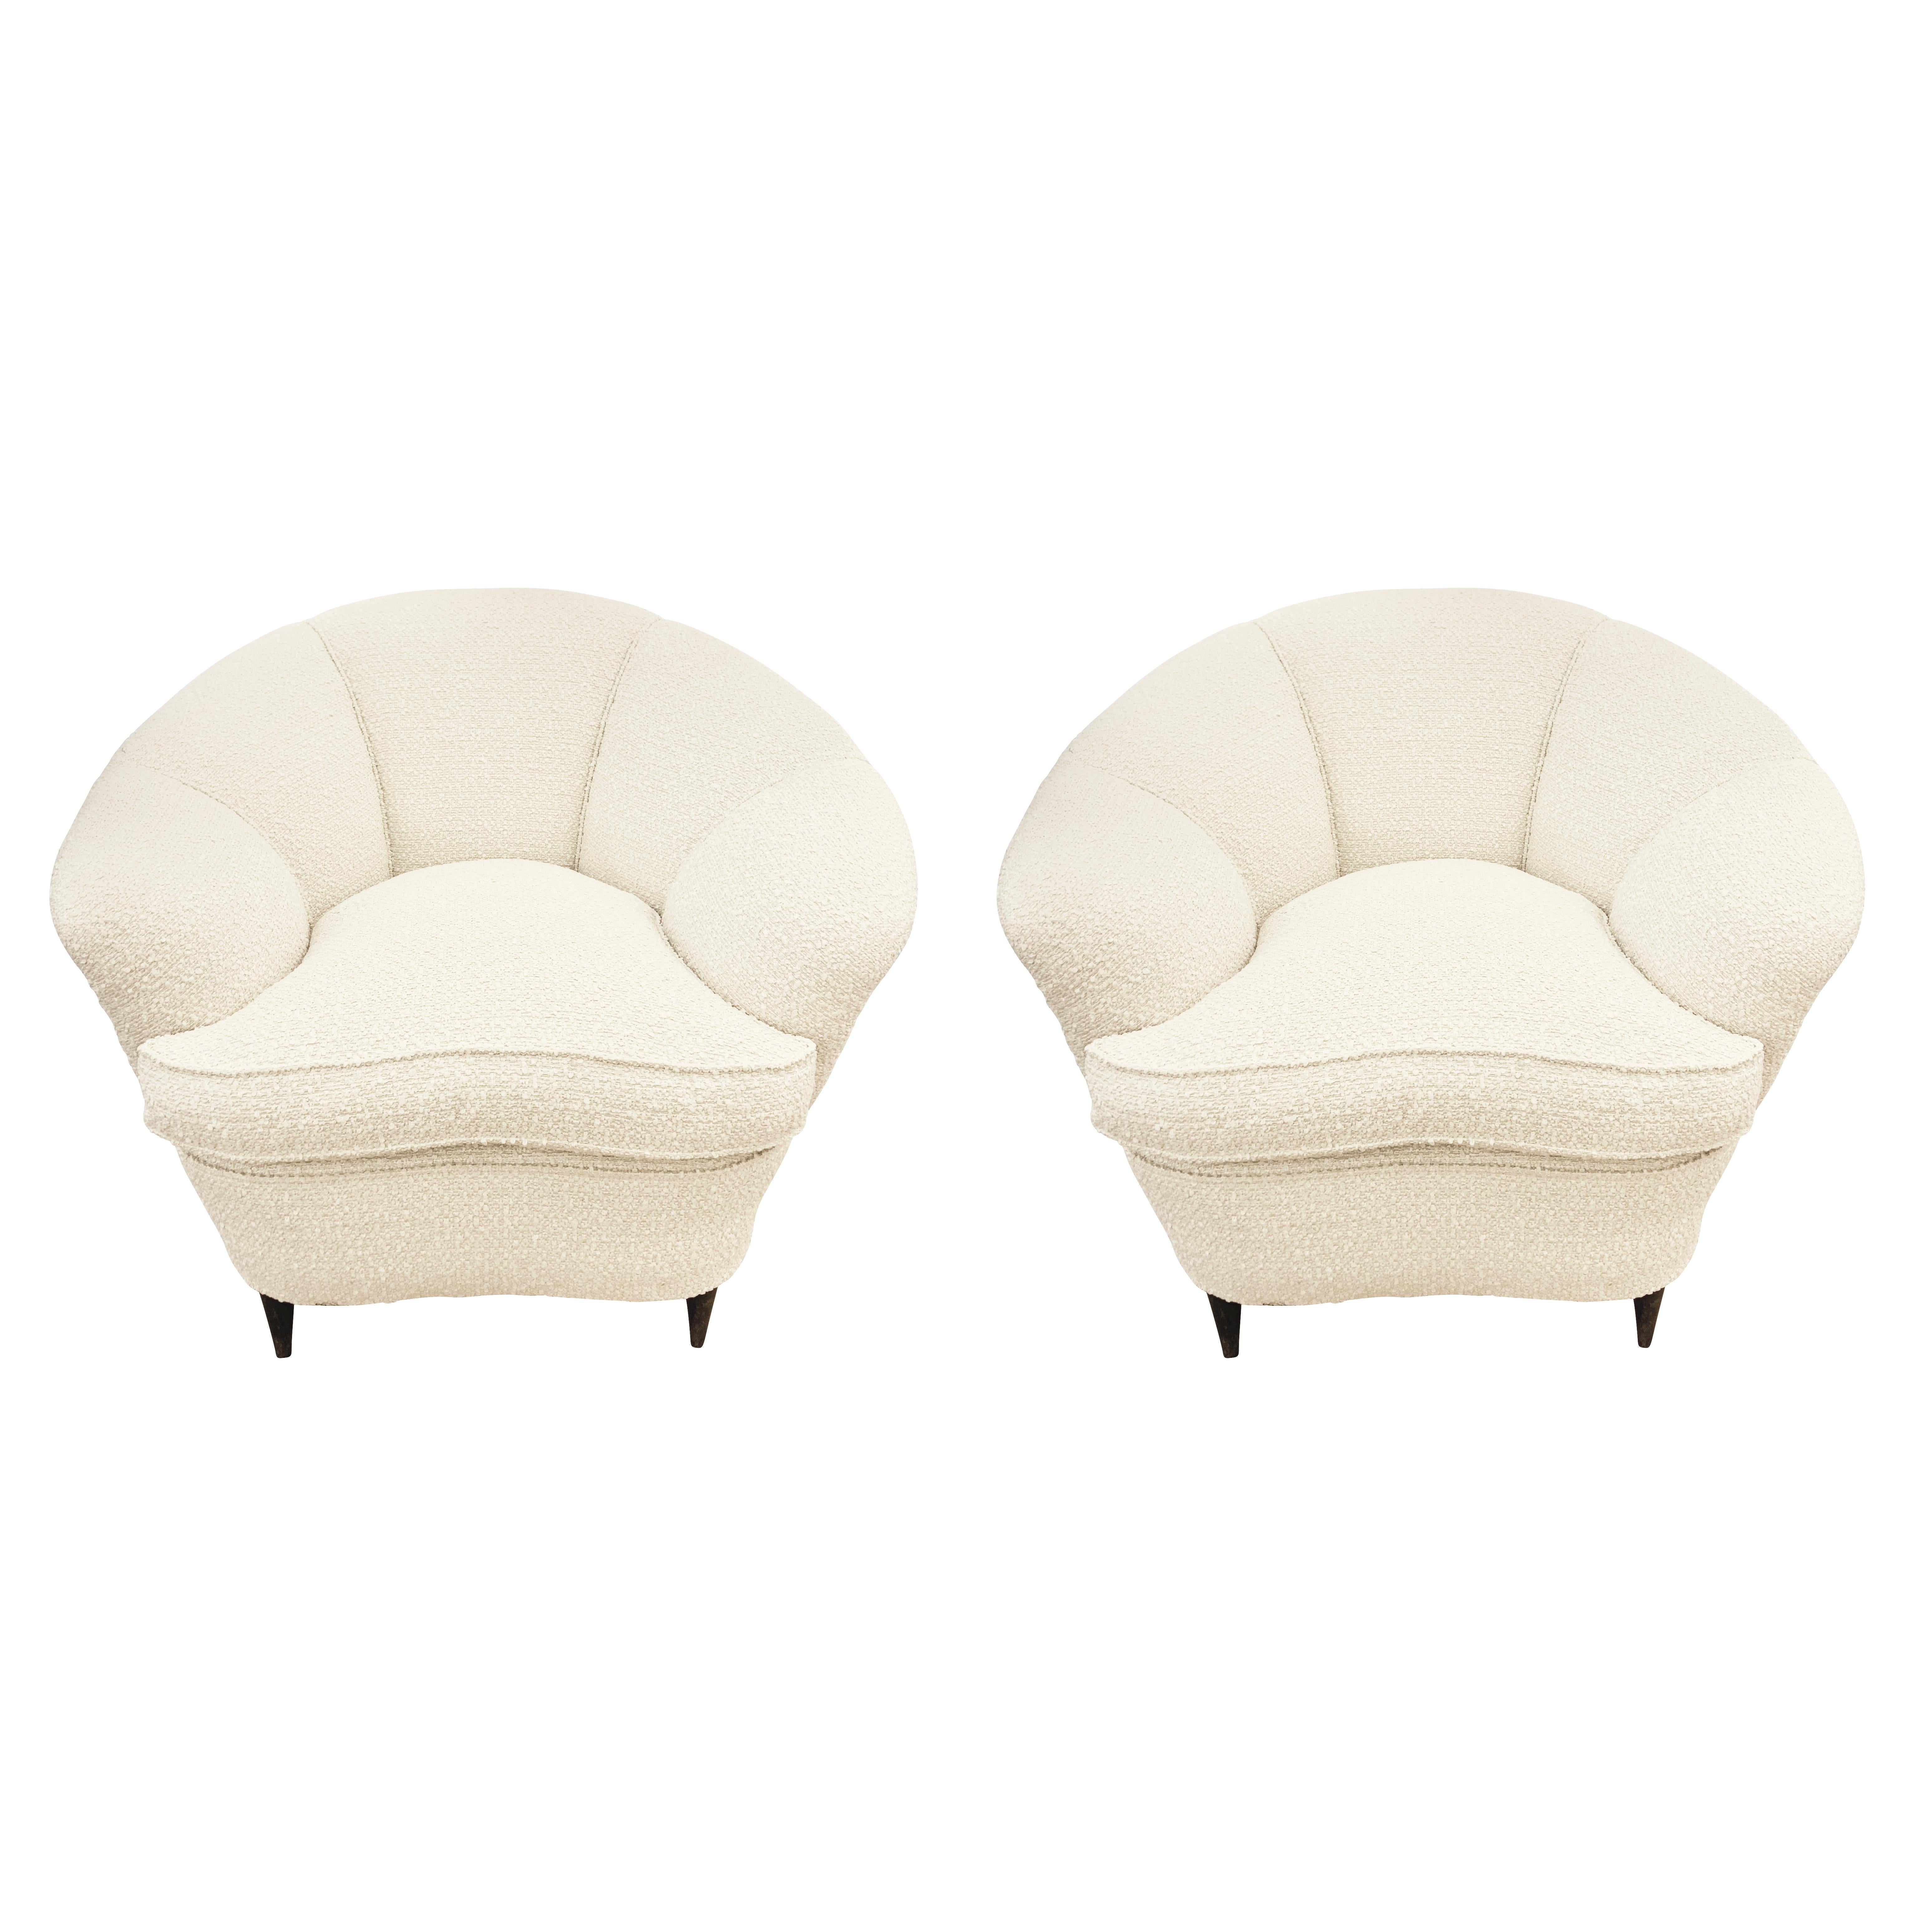 Pair of Italian Mid-Century armchairs recovered with an ivory boucle fabric and with tapering wood feet. Price for the pair-can be split on request.

Condition: Excellent vintage condition, minor wear consistent with age and use. Recently